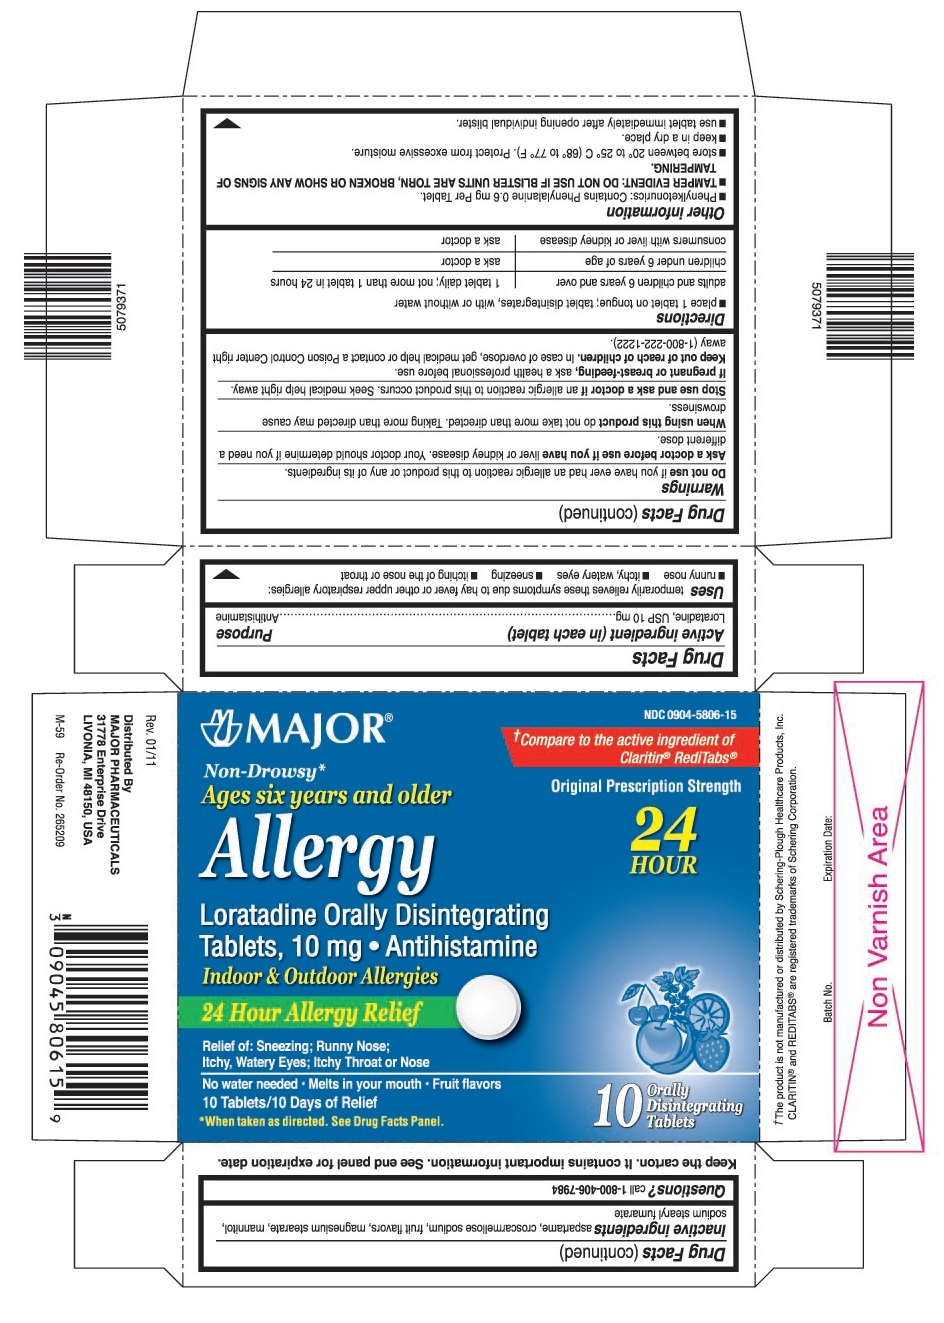 This is the 10 count blister carton label for Major Loratadine orally disintegrating tablets, 10 mg.